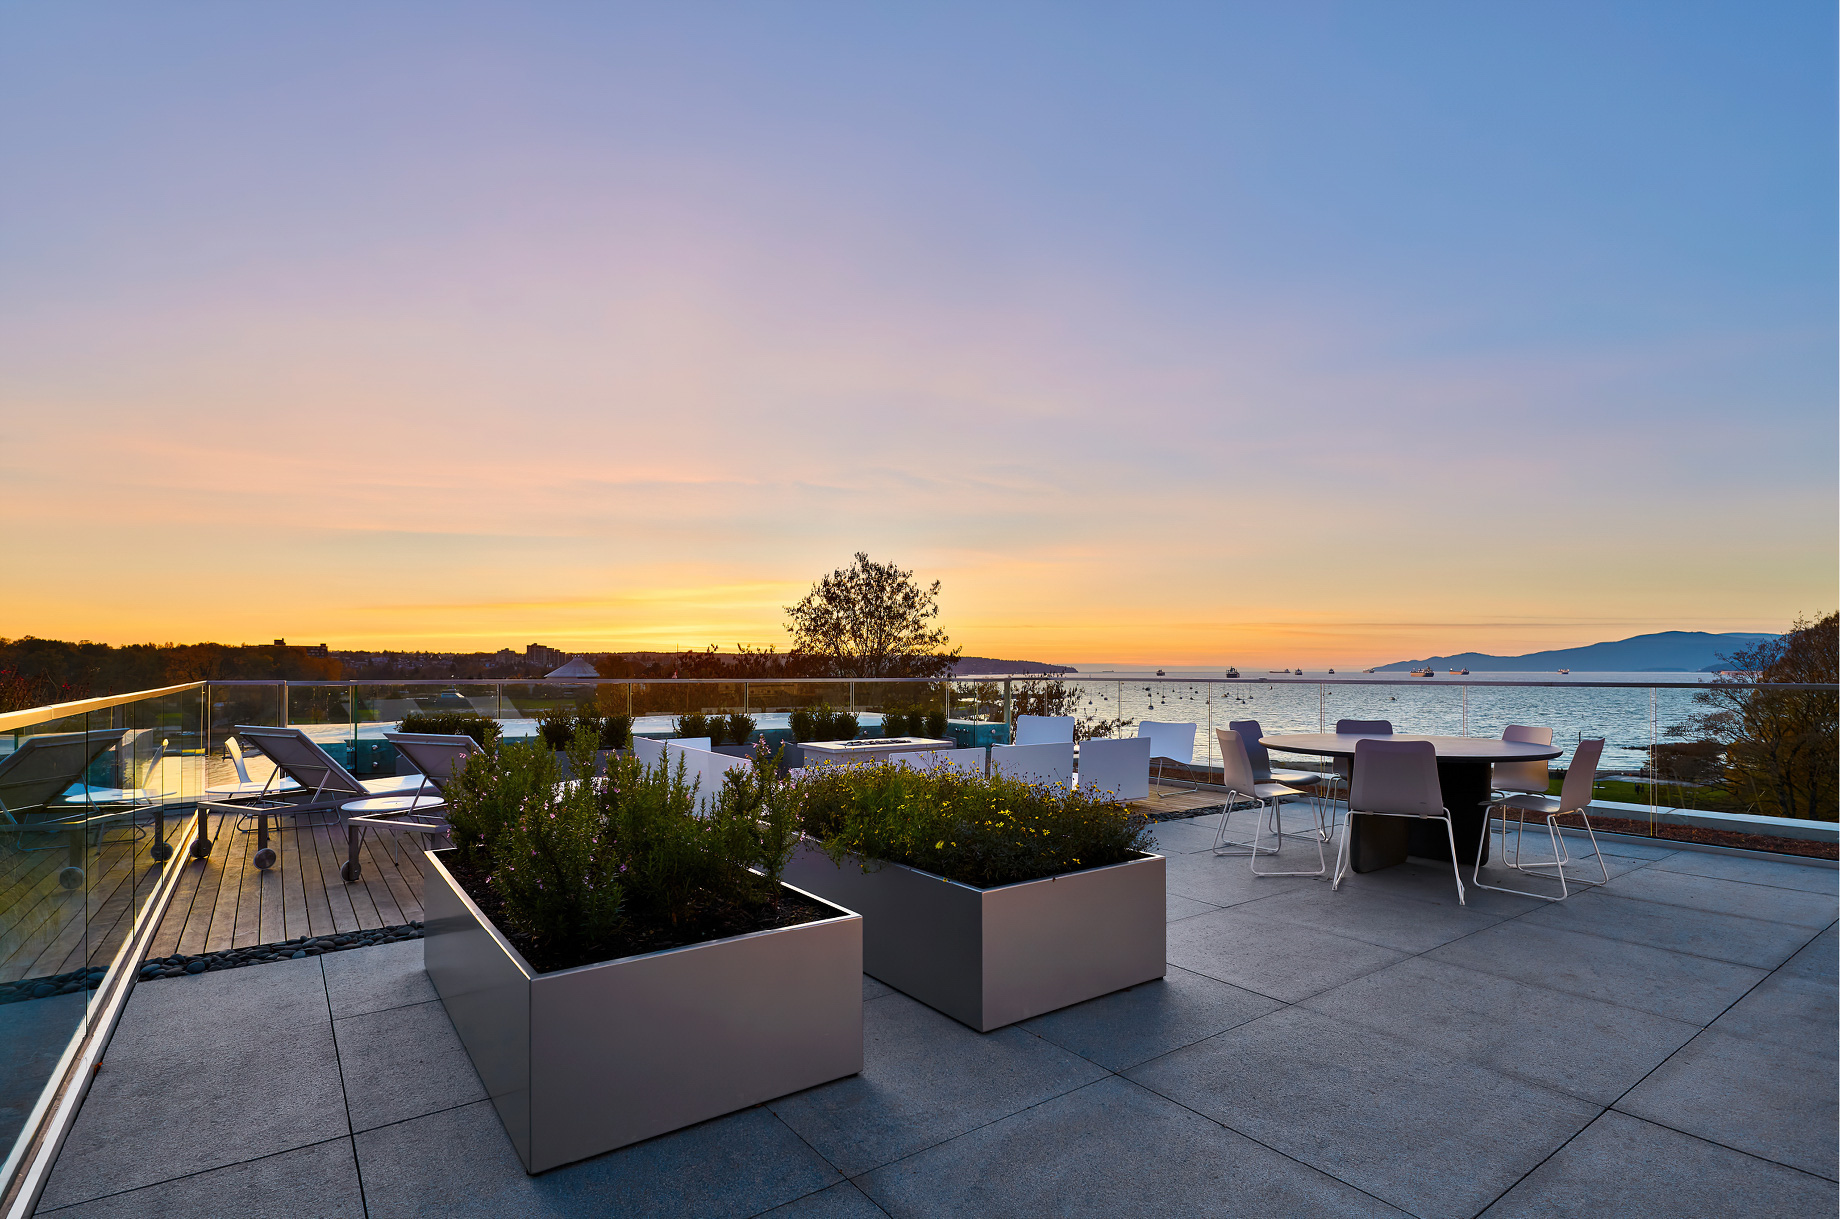 Eventide Ultra Luxury English Bay Homes – Bute St, Vancouver, BC, Canada – Rooftop Deck Sunset